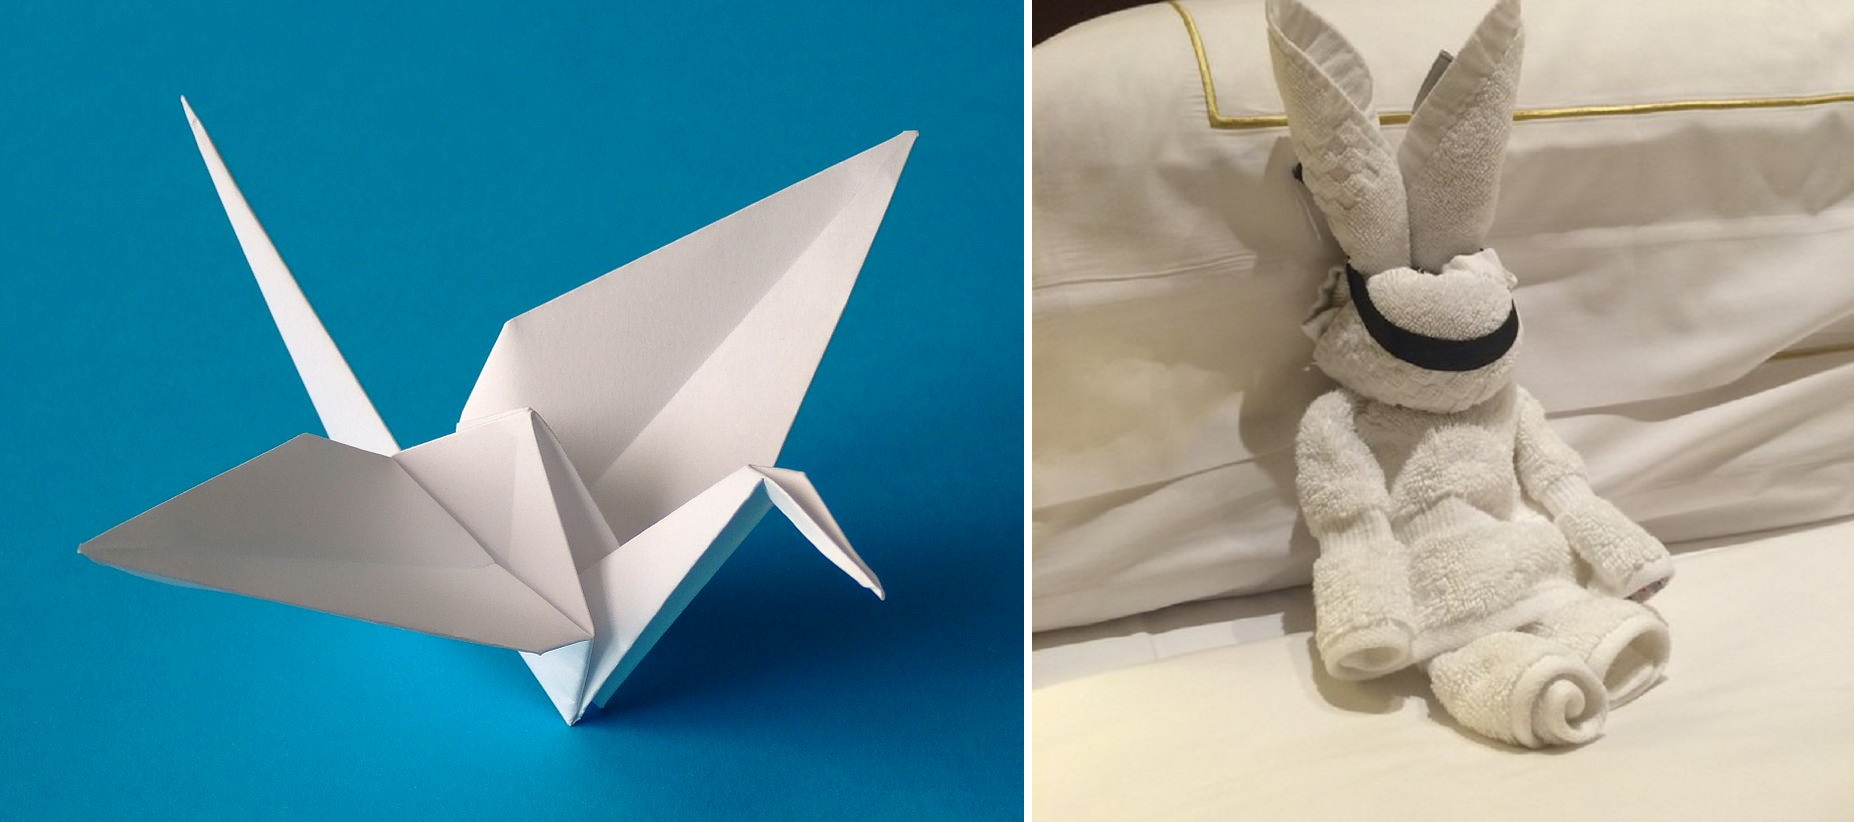 Ten Pound Note Origami Hotel Guest Leaves Origami For Cleaning Staff Back And Forth